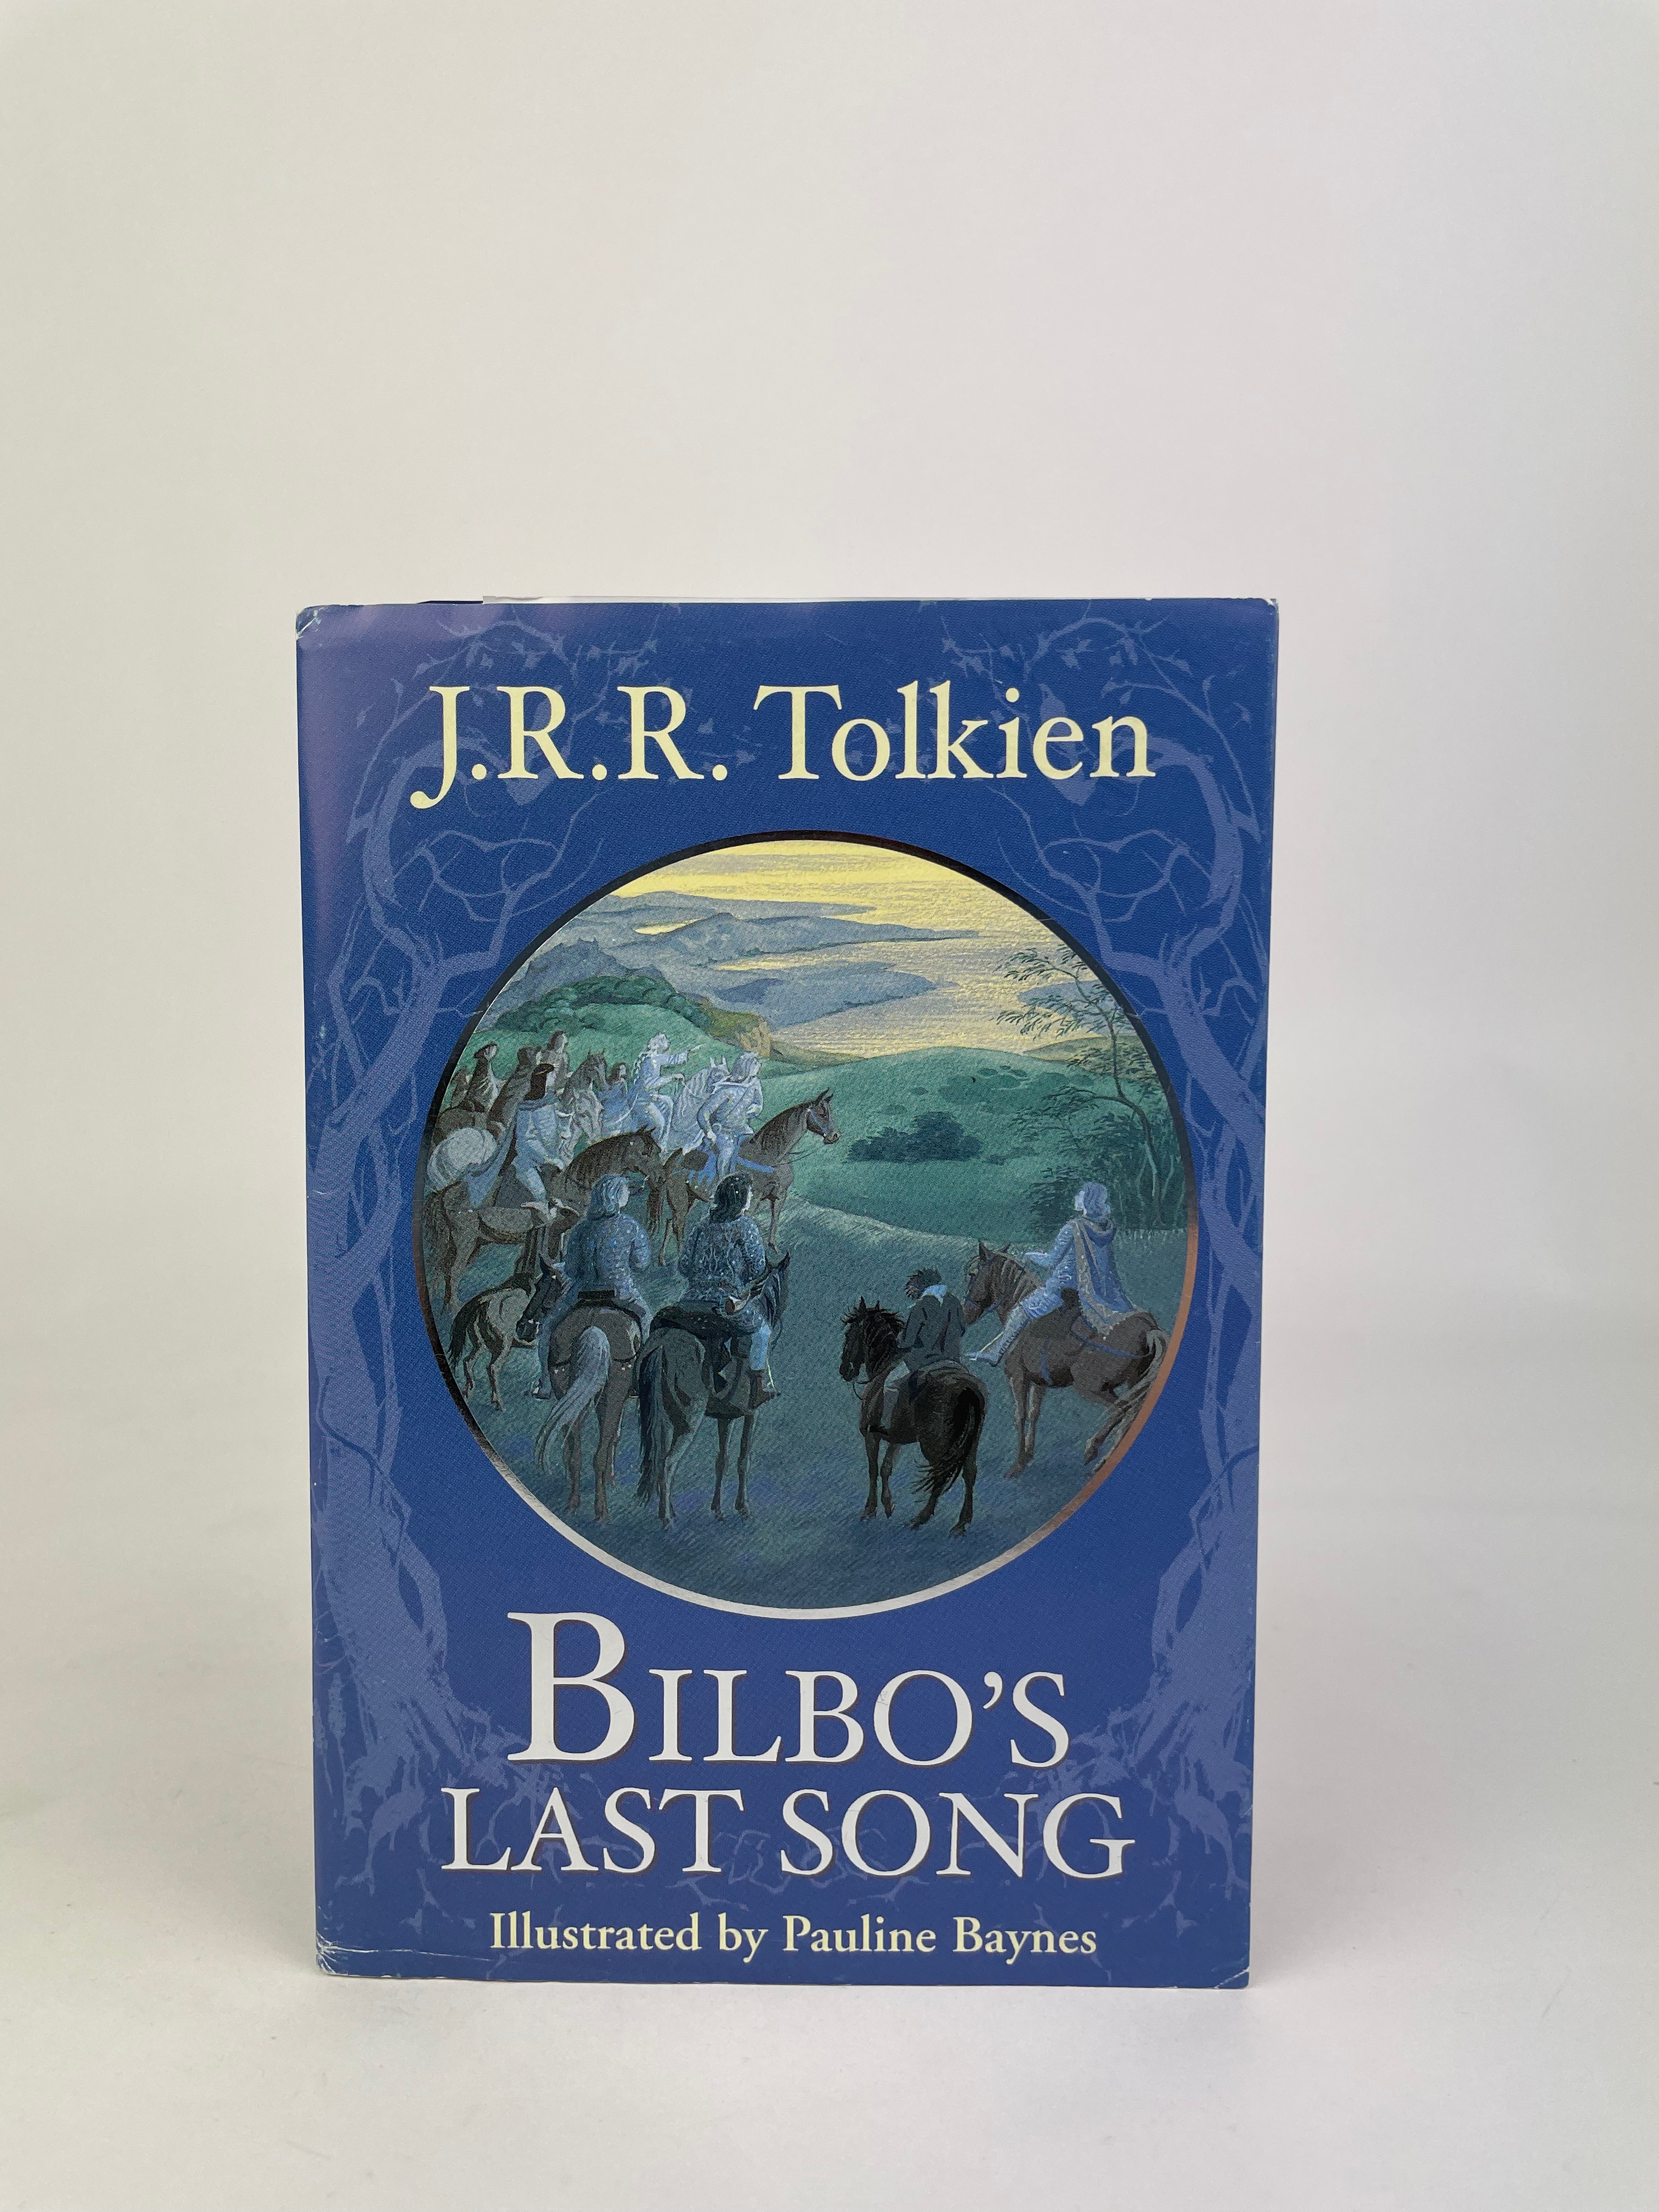 Advance Uncorrected Proof of Bilbo's Last Song by Tolkien, with illustrations by Pauline Baynes